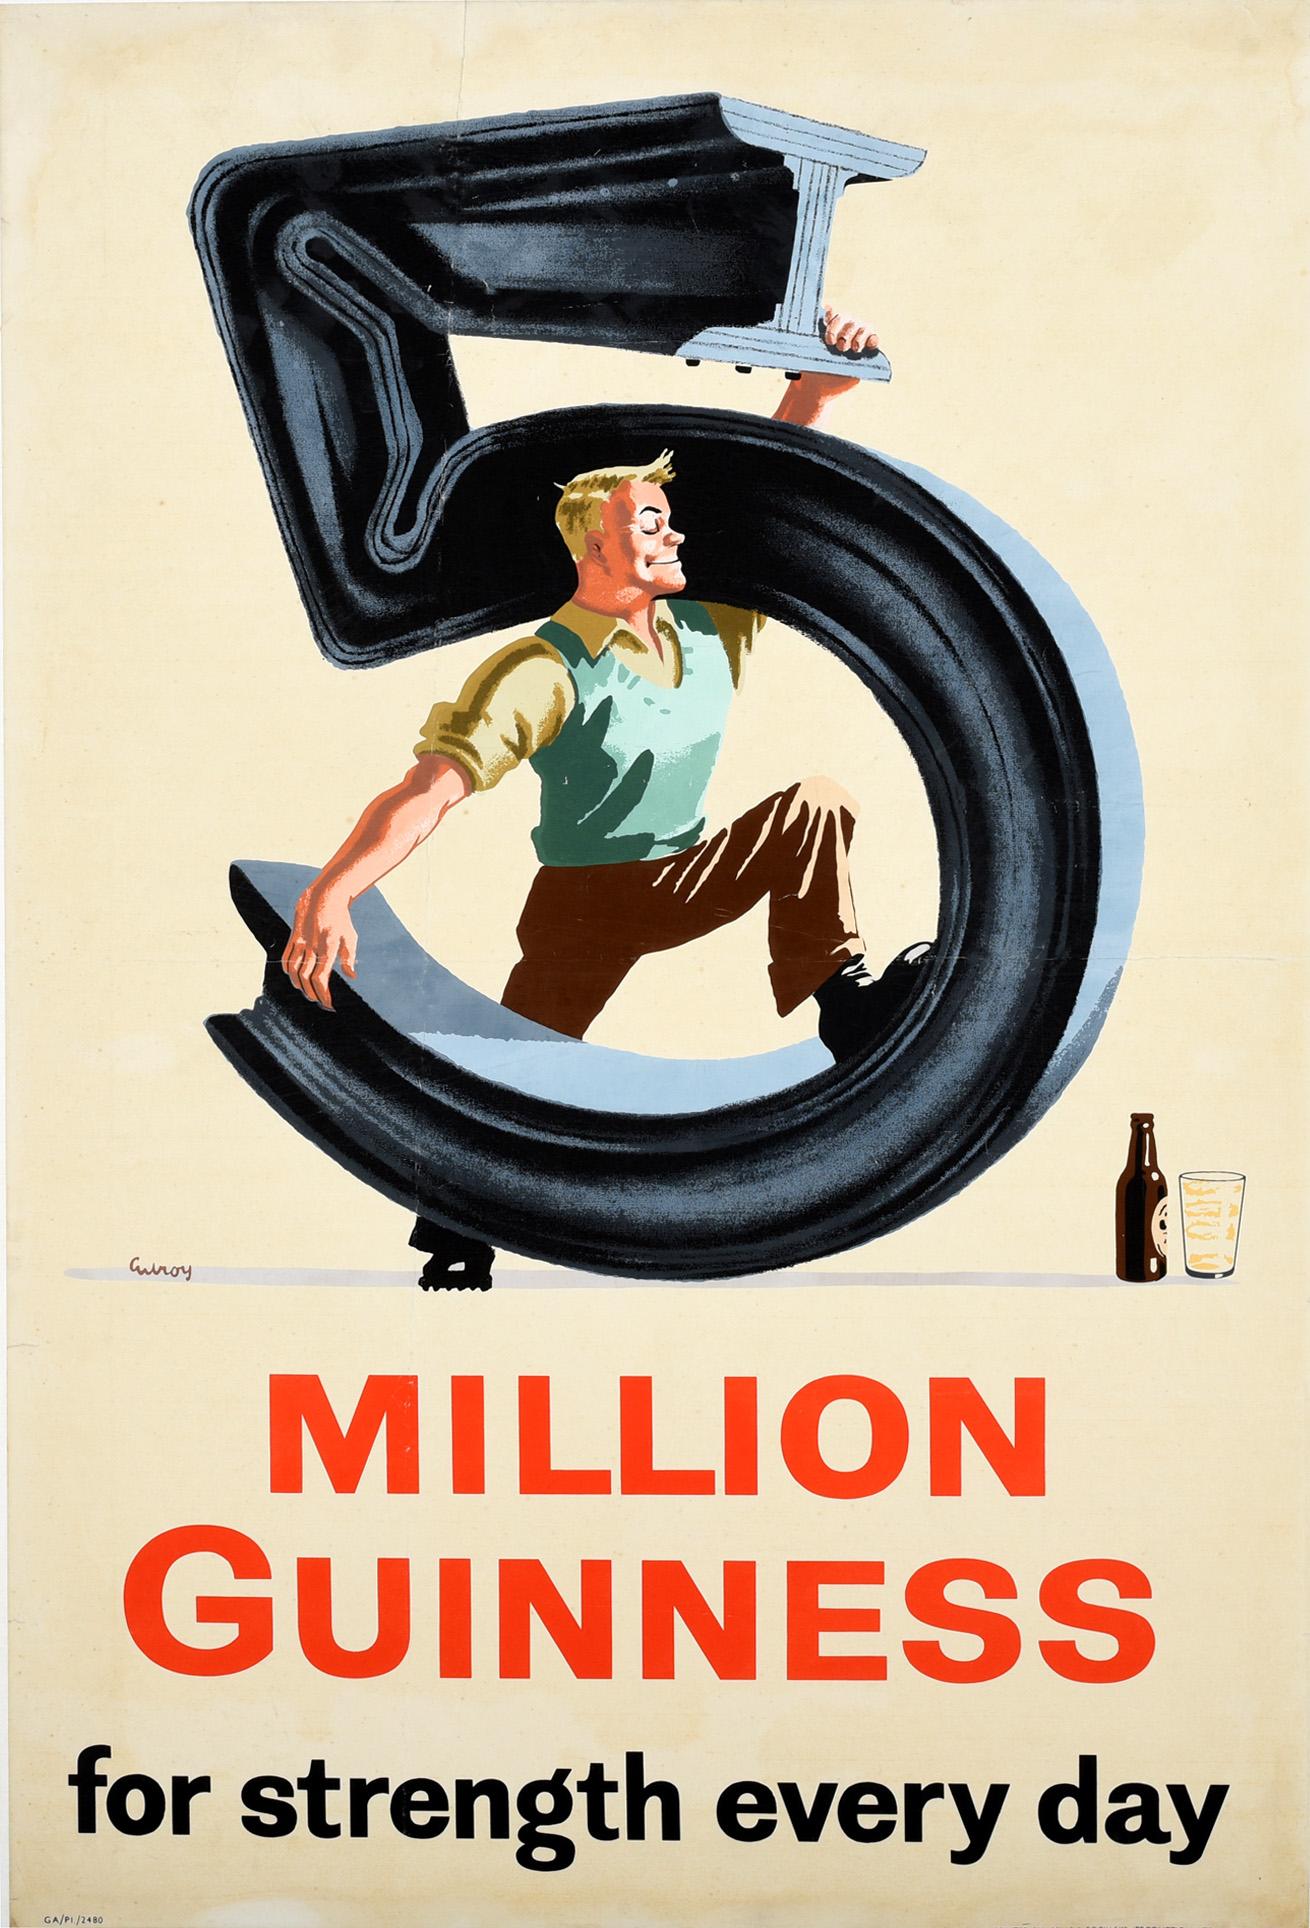 John Gilroy Print - Original Vintage Drink Poster 5 Million Guinness For Strength Every Day Steel